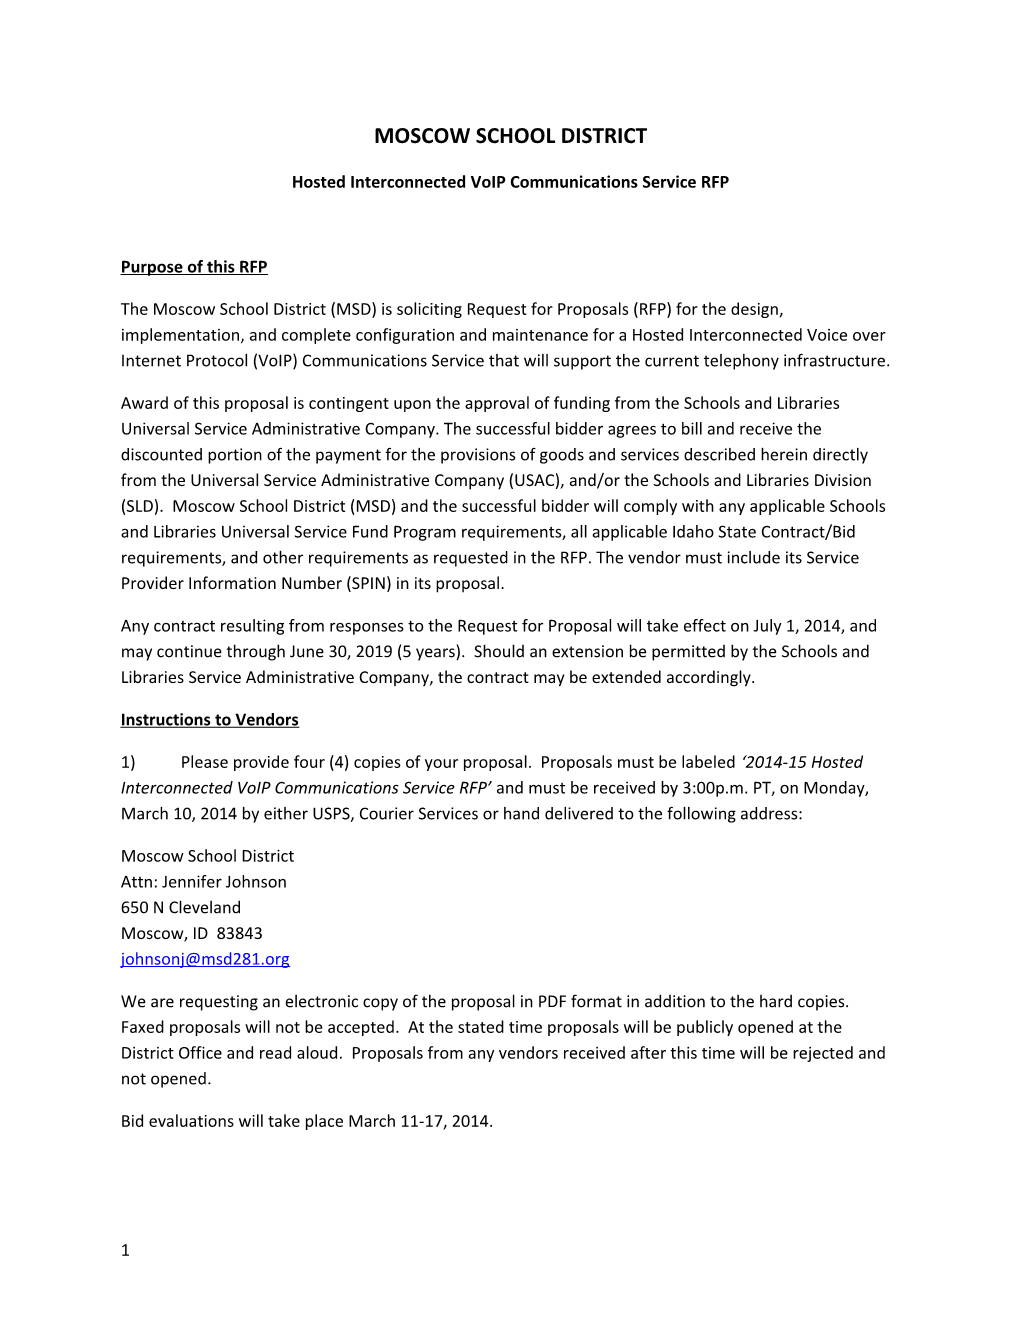 Hosted Interconnected Voip Communications Service RFP